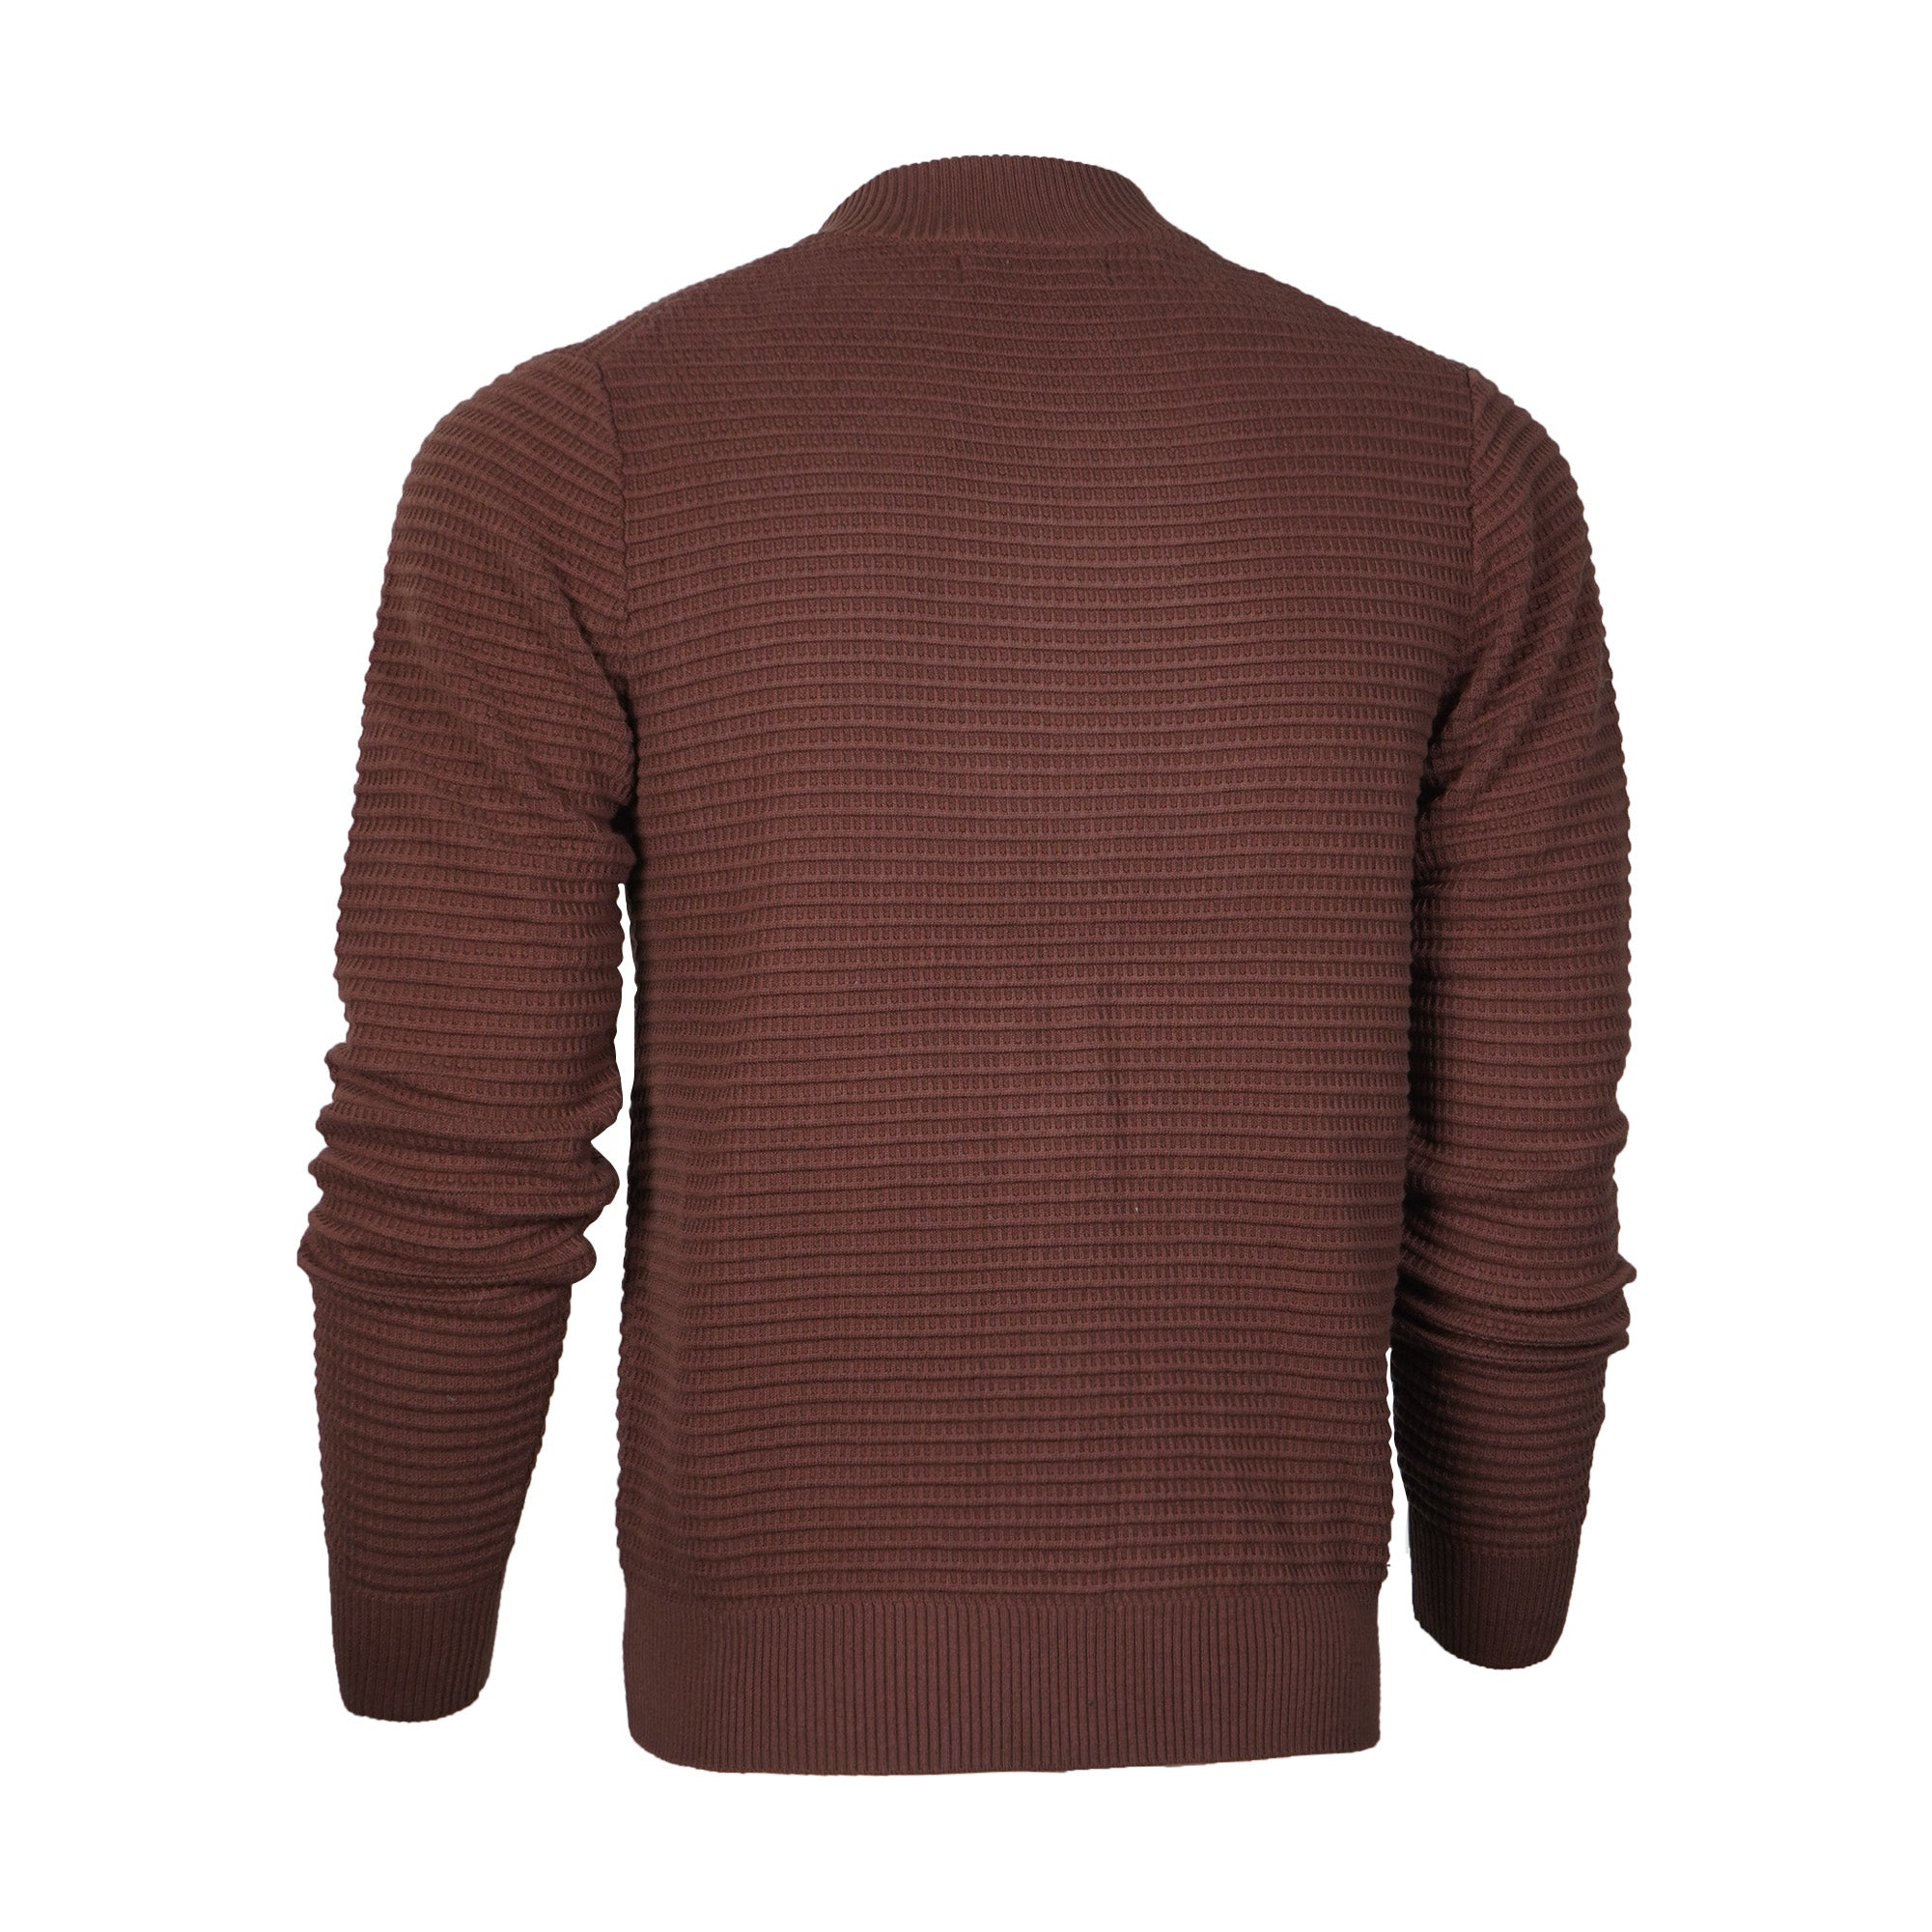 Men's Tight Knitted Zip Up Cardigans